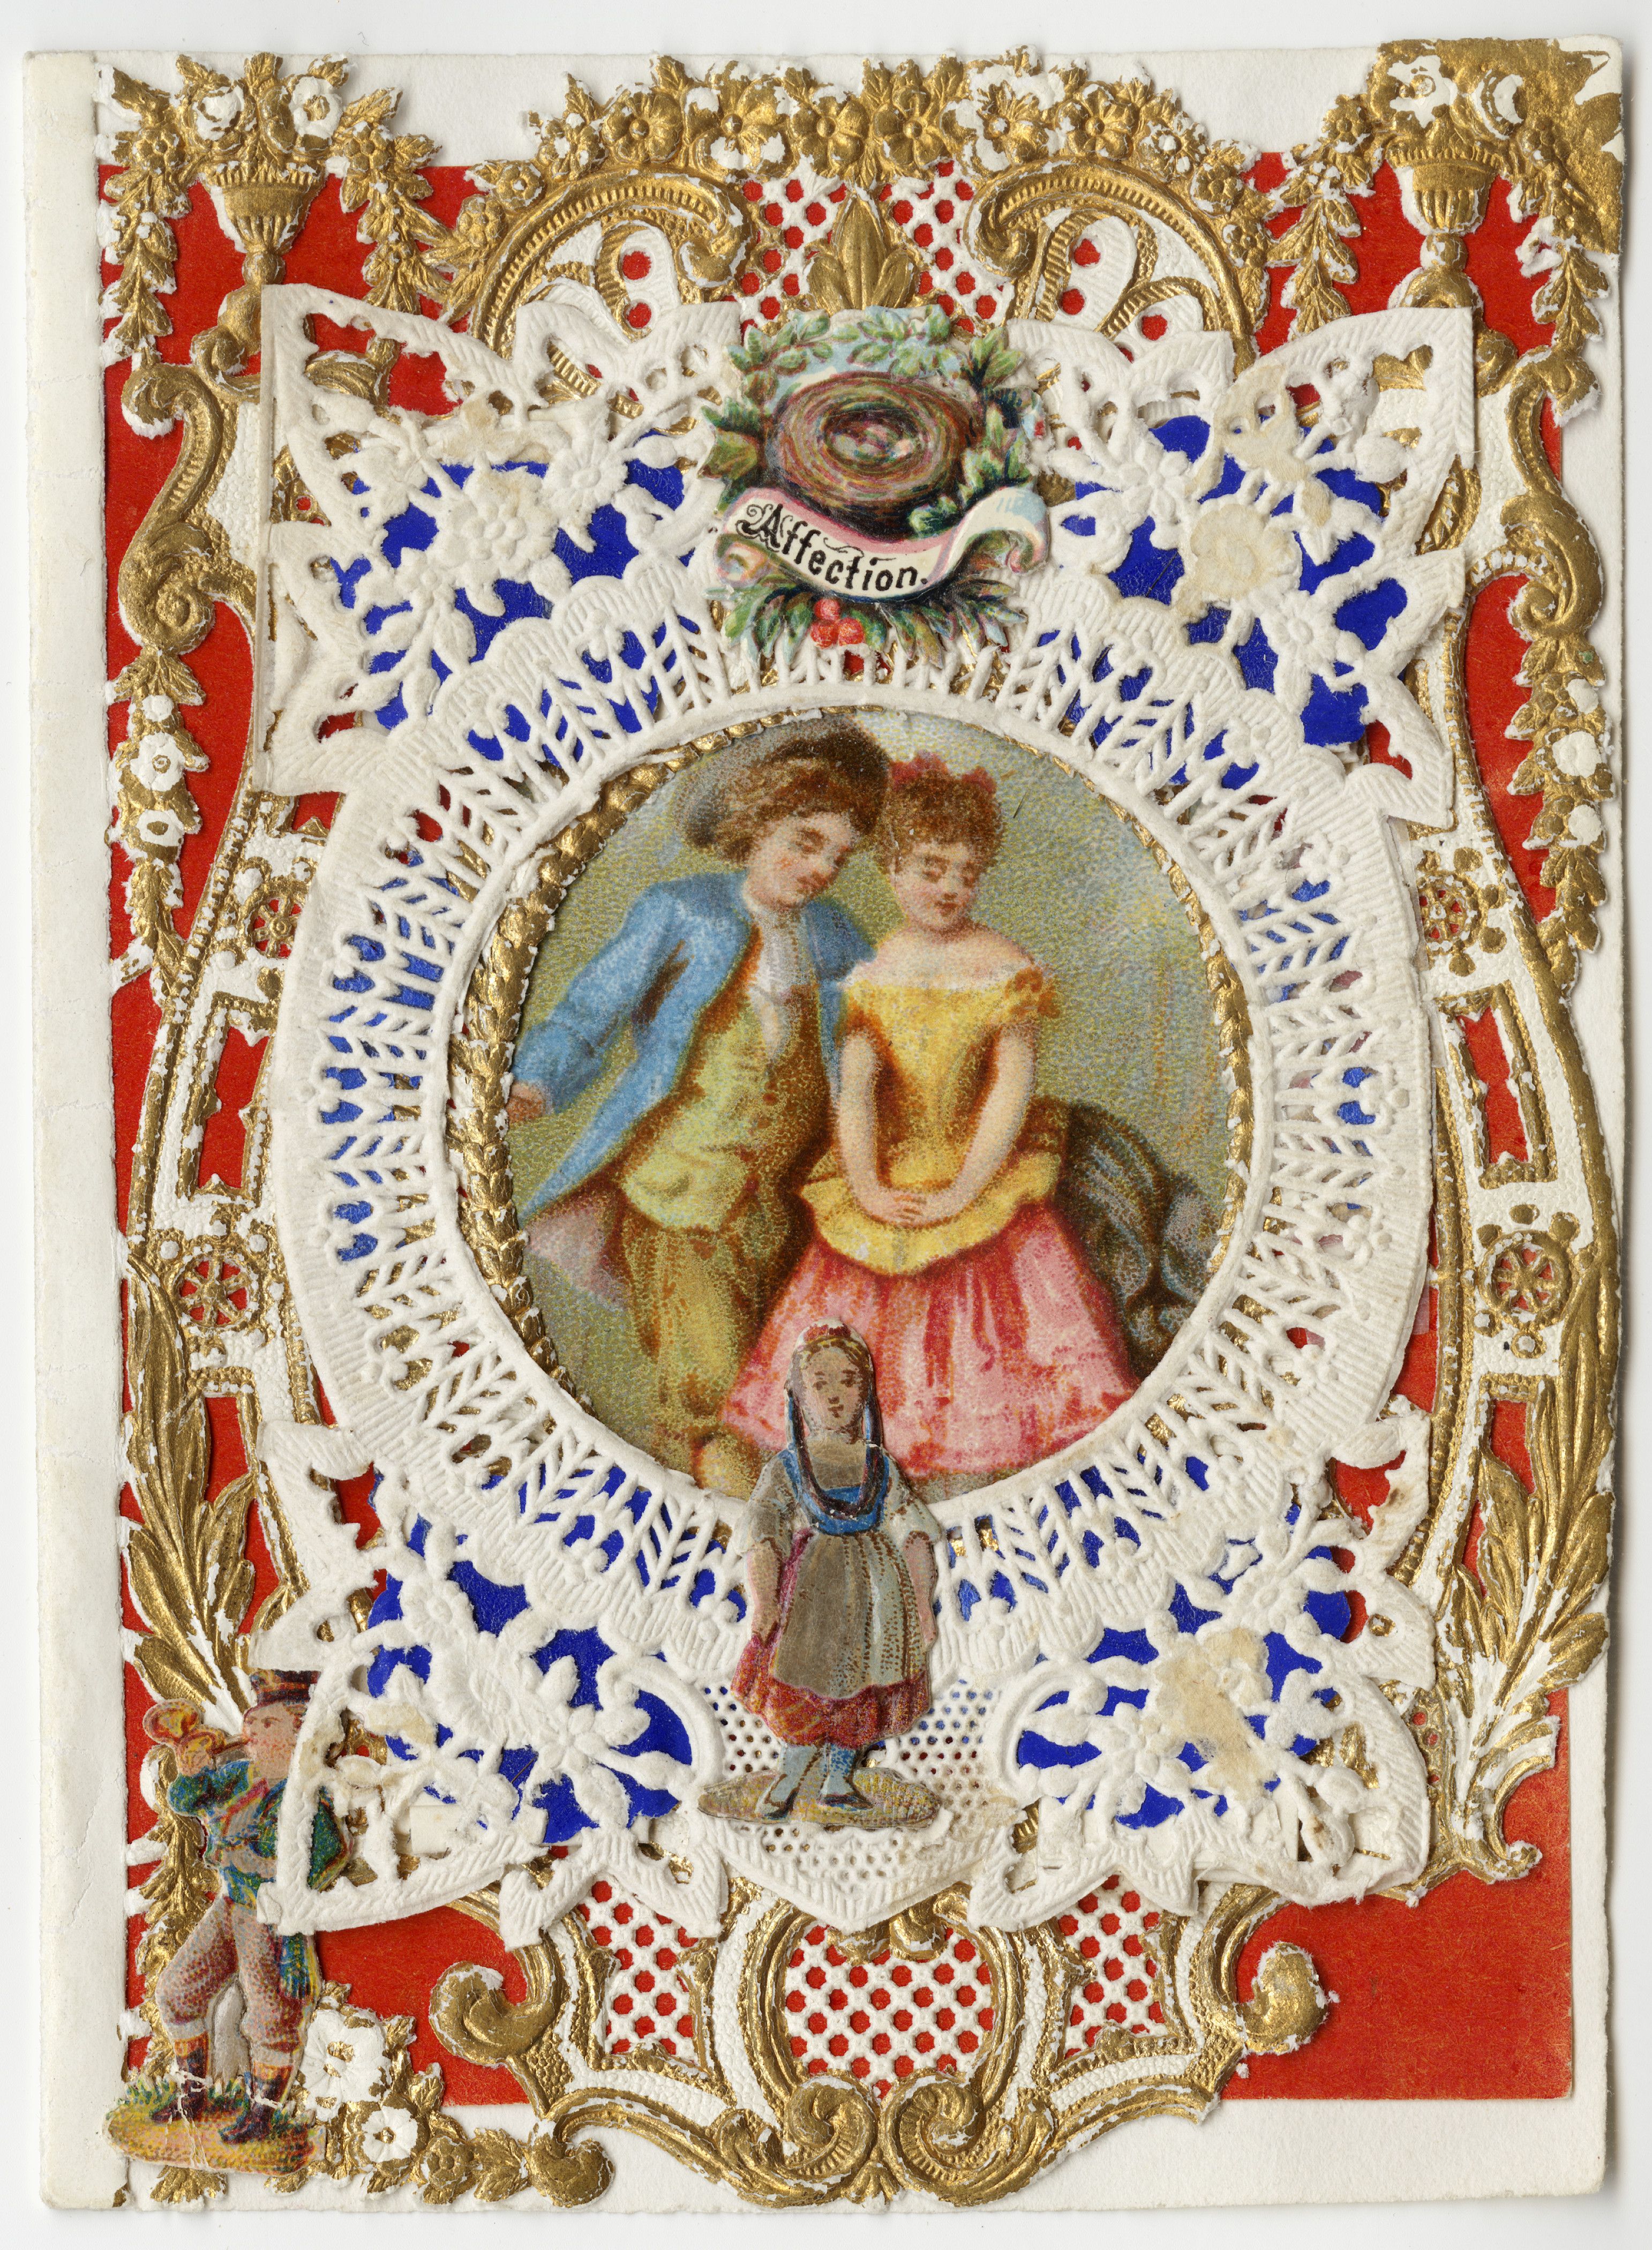 An Esther Howland Valentine's card. "Affection" ca. 1870.